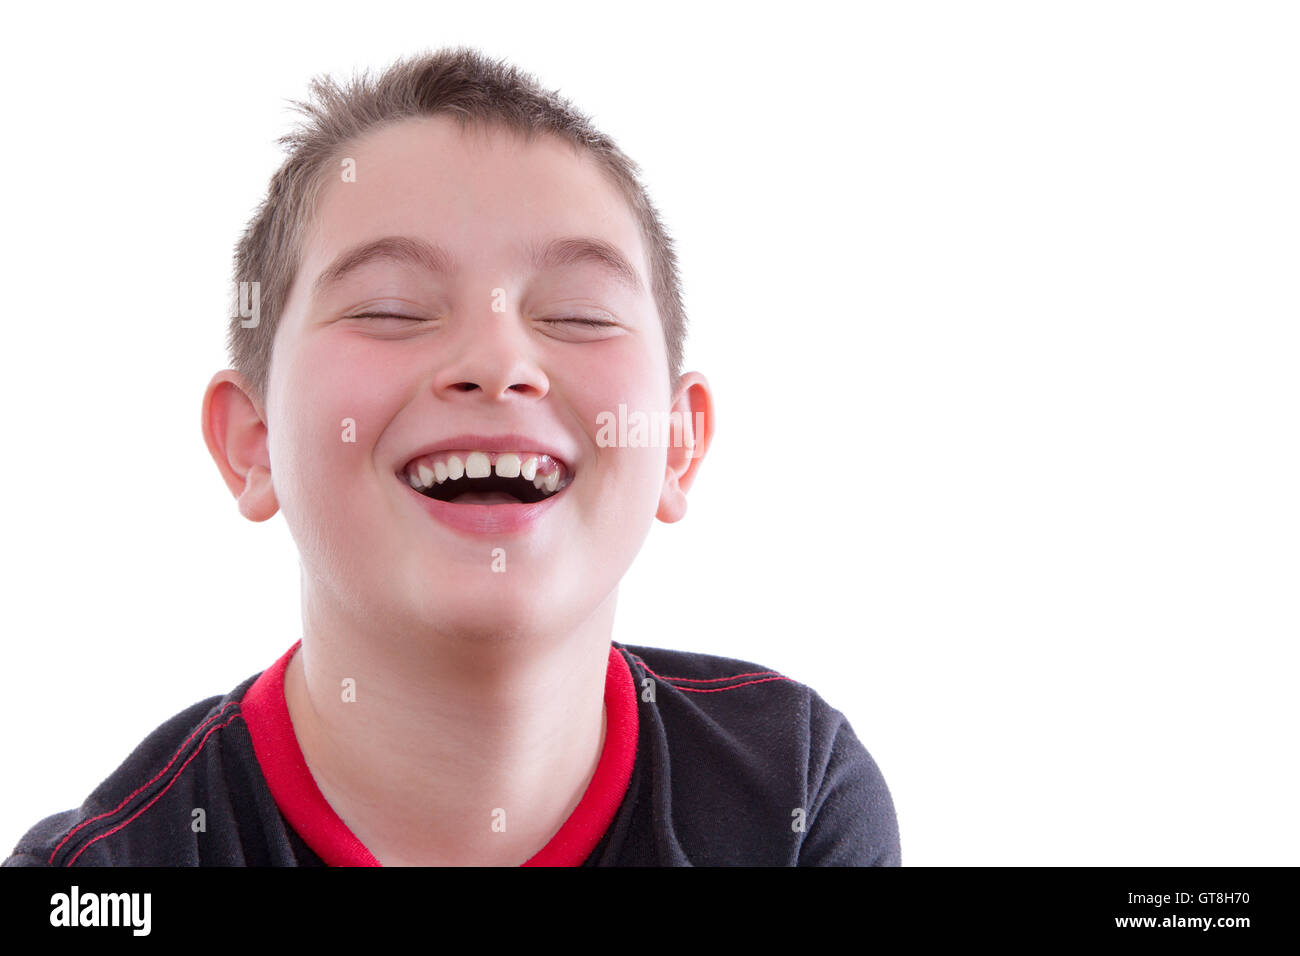 Head and Shoulders Close Up Portrait of Joyful Young Boy Wearing Red and Black T-Shirt and Laughing with Eyes Closed in Studio w Stock Photo